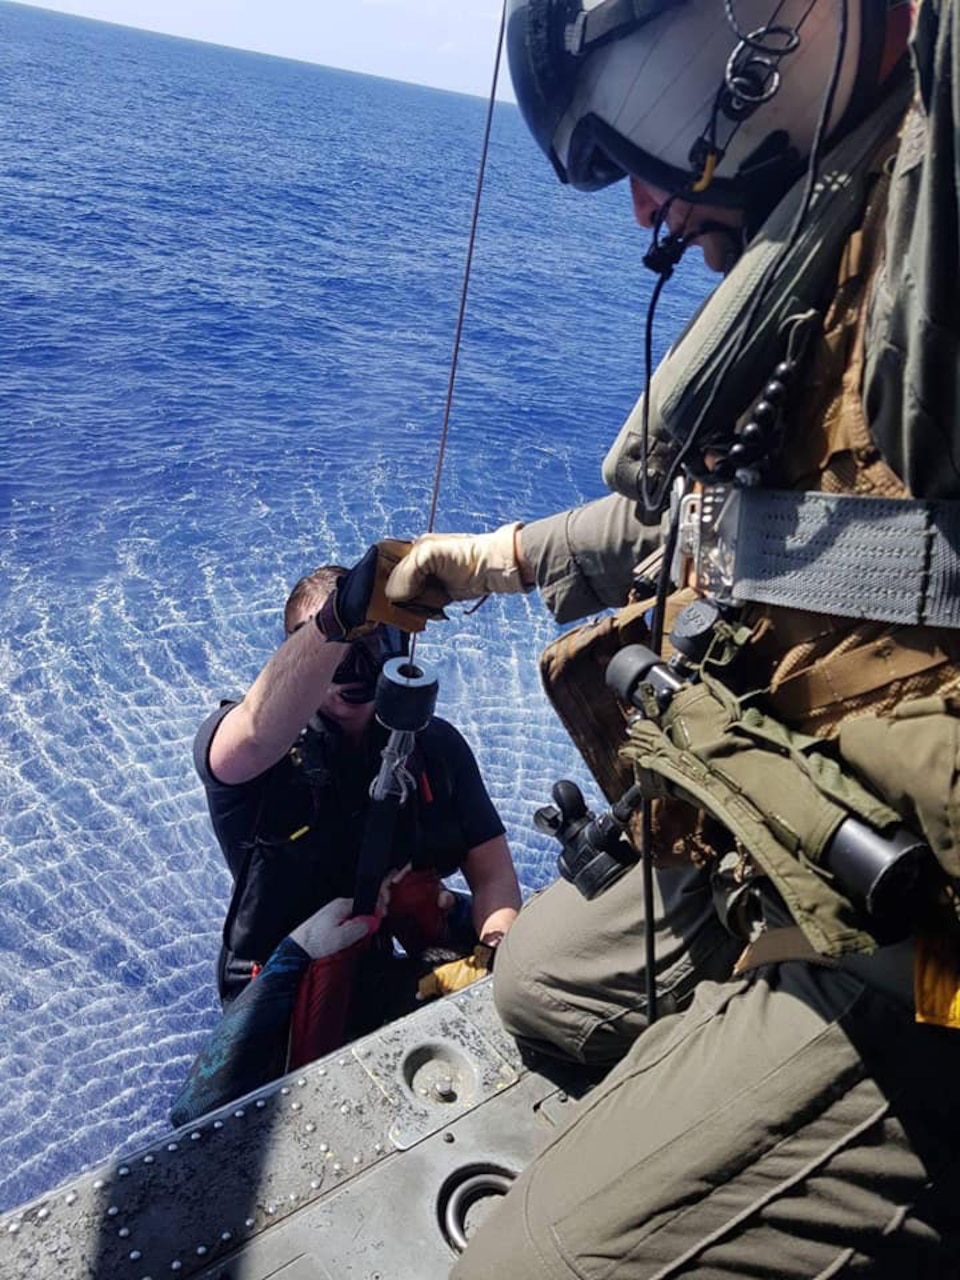 PACIFIC OCEAN (July 26, 2018) -- Sailors assigned to the Guam-based “Island Knights” from Helicopter Sea Combat Squadron (HSC) 25 rescue divers separated from their boat more than 15 miles from the Guam shore.